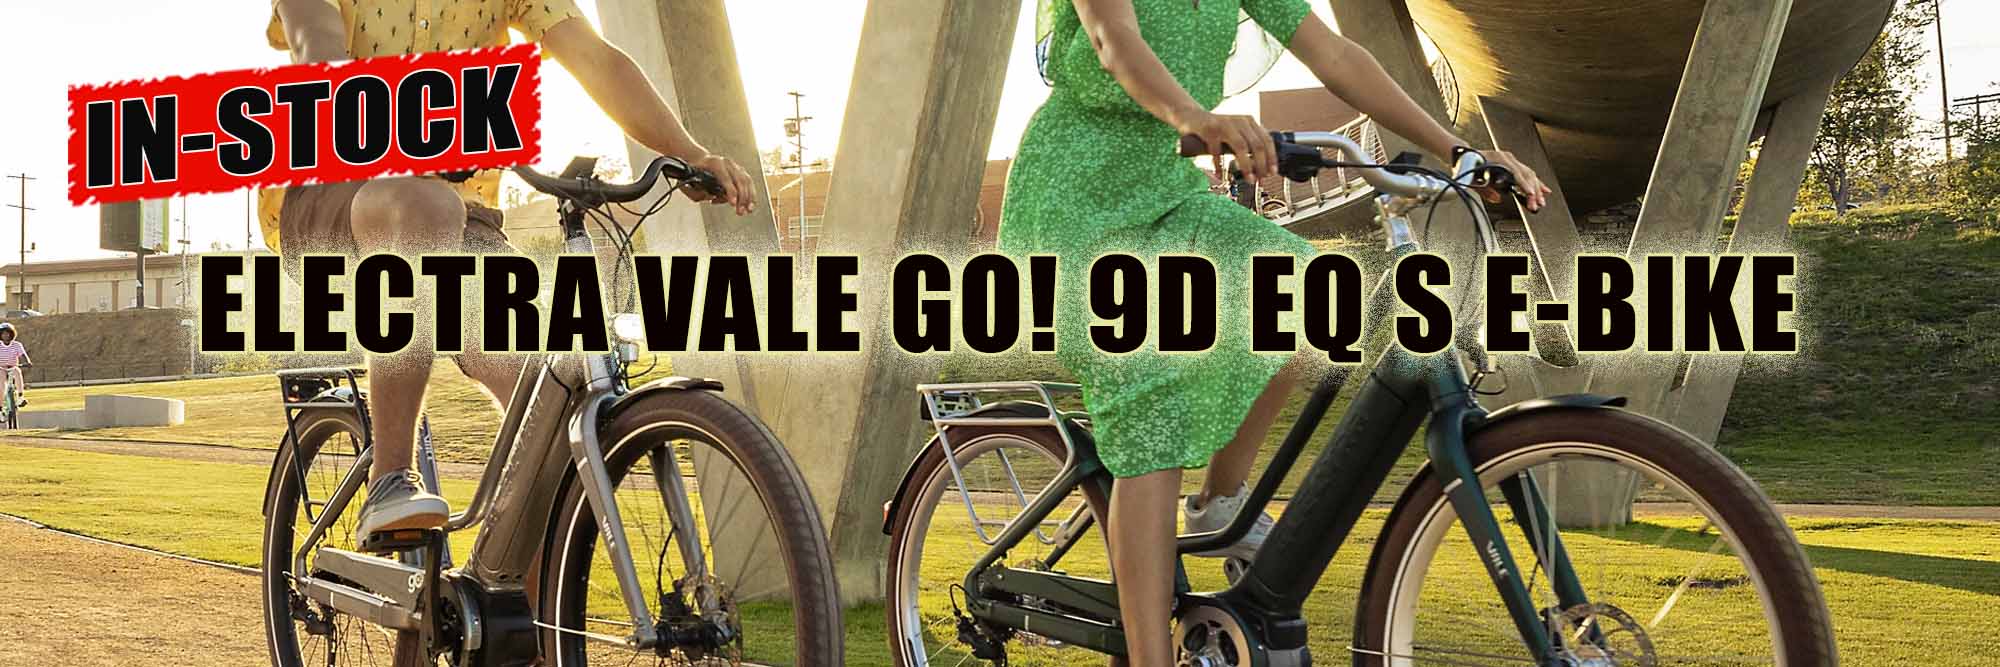 The Electra Vale Go! 9D S In-Stock Now